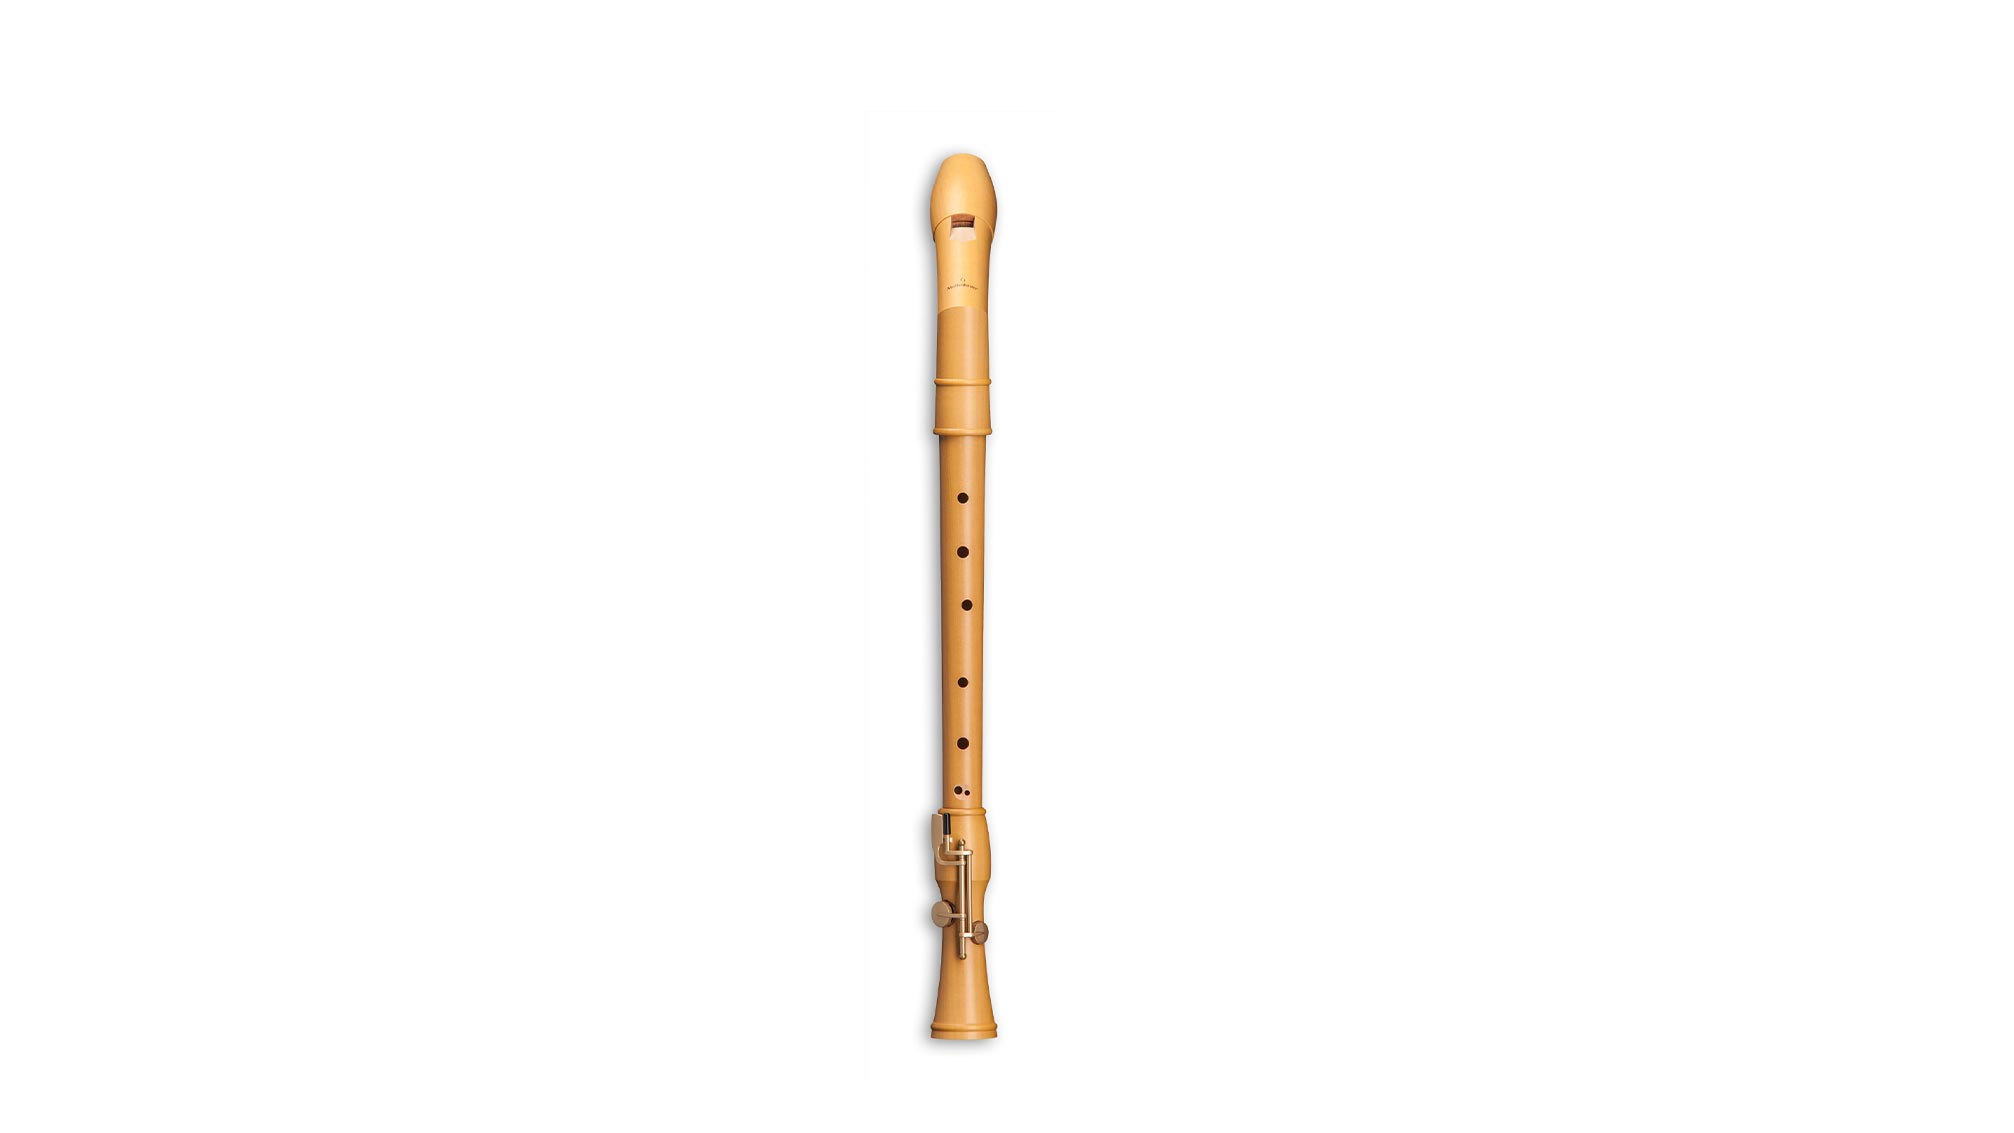 Mollenhauer, "Canta", bent tenor in c', baroque double hole, with double keys, pearwood